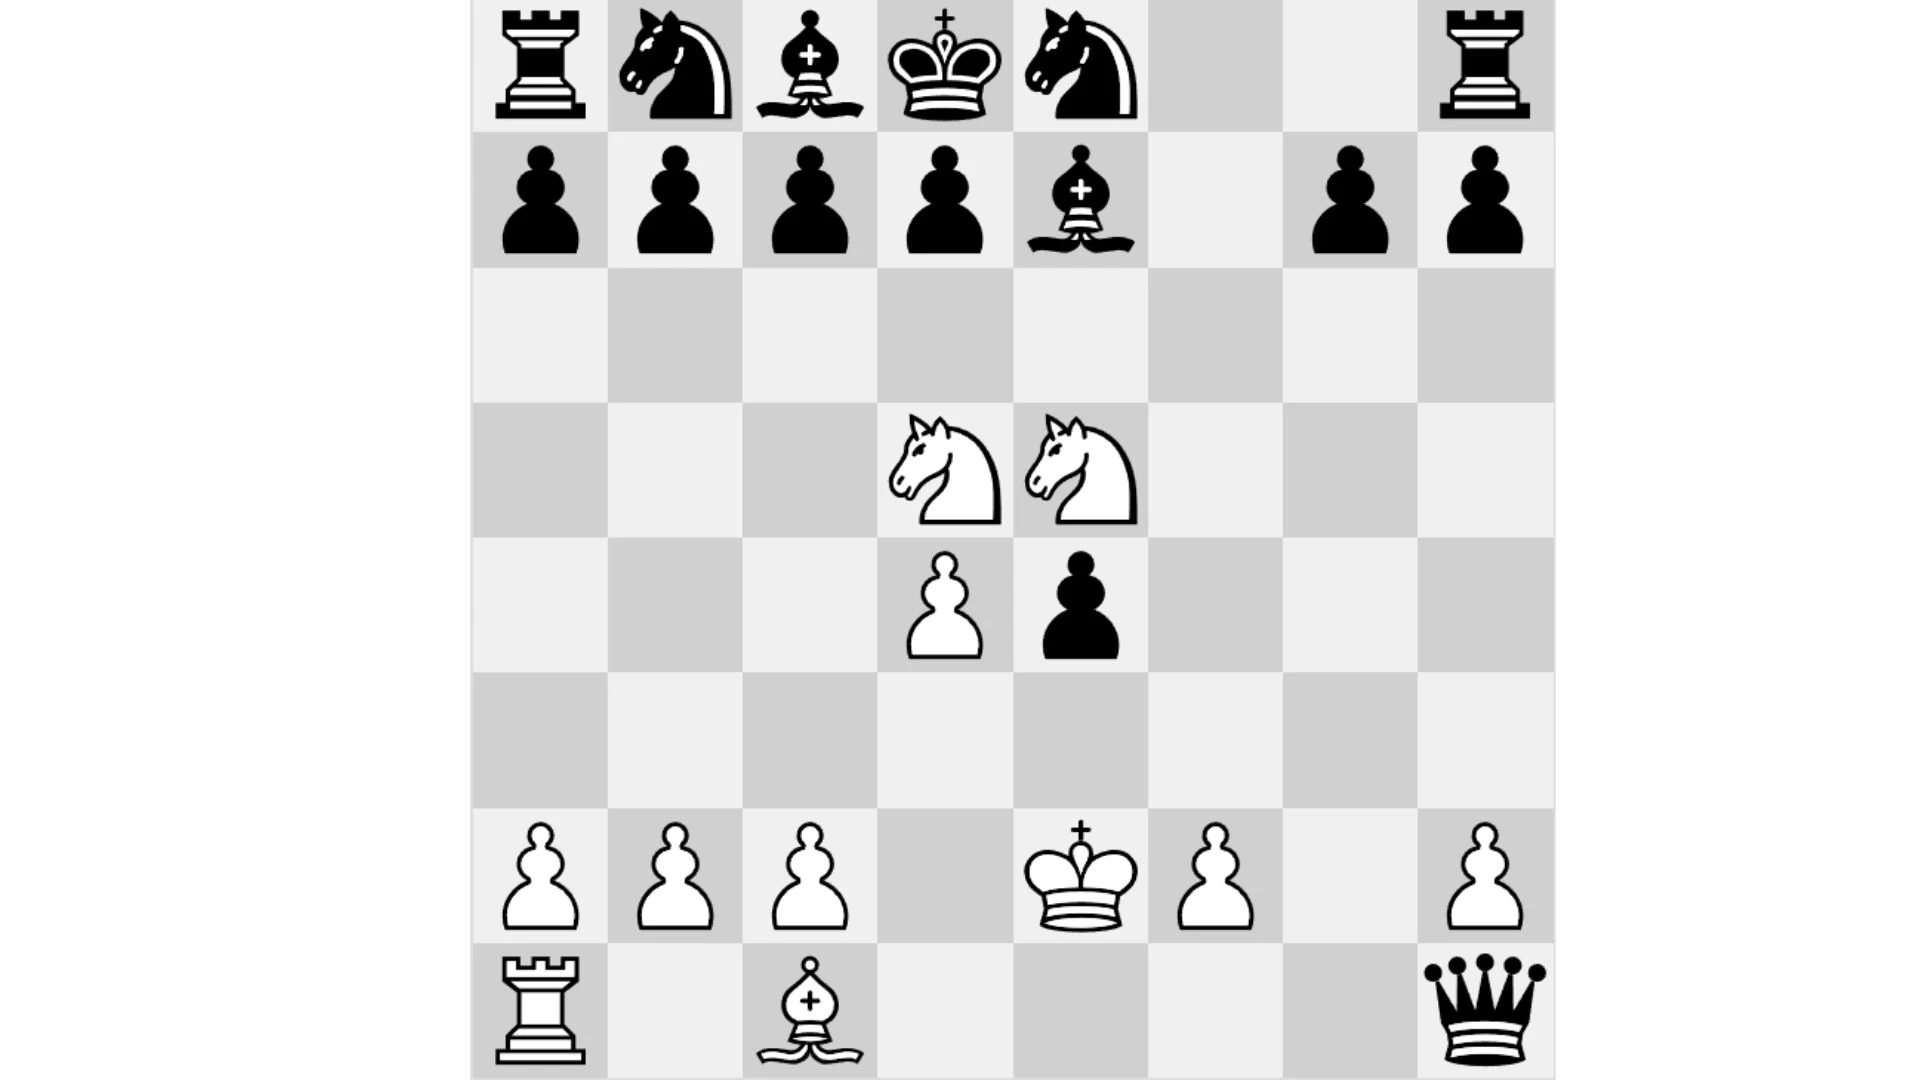 Can You Solve This Chess Puzzle Using Only A Single Move?